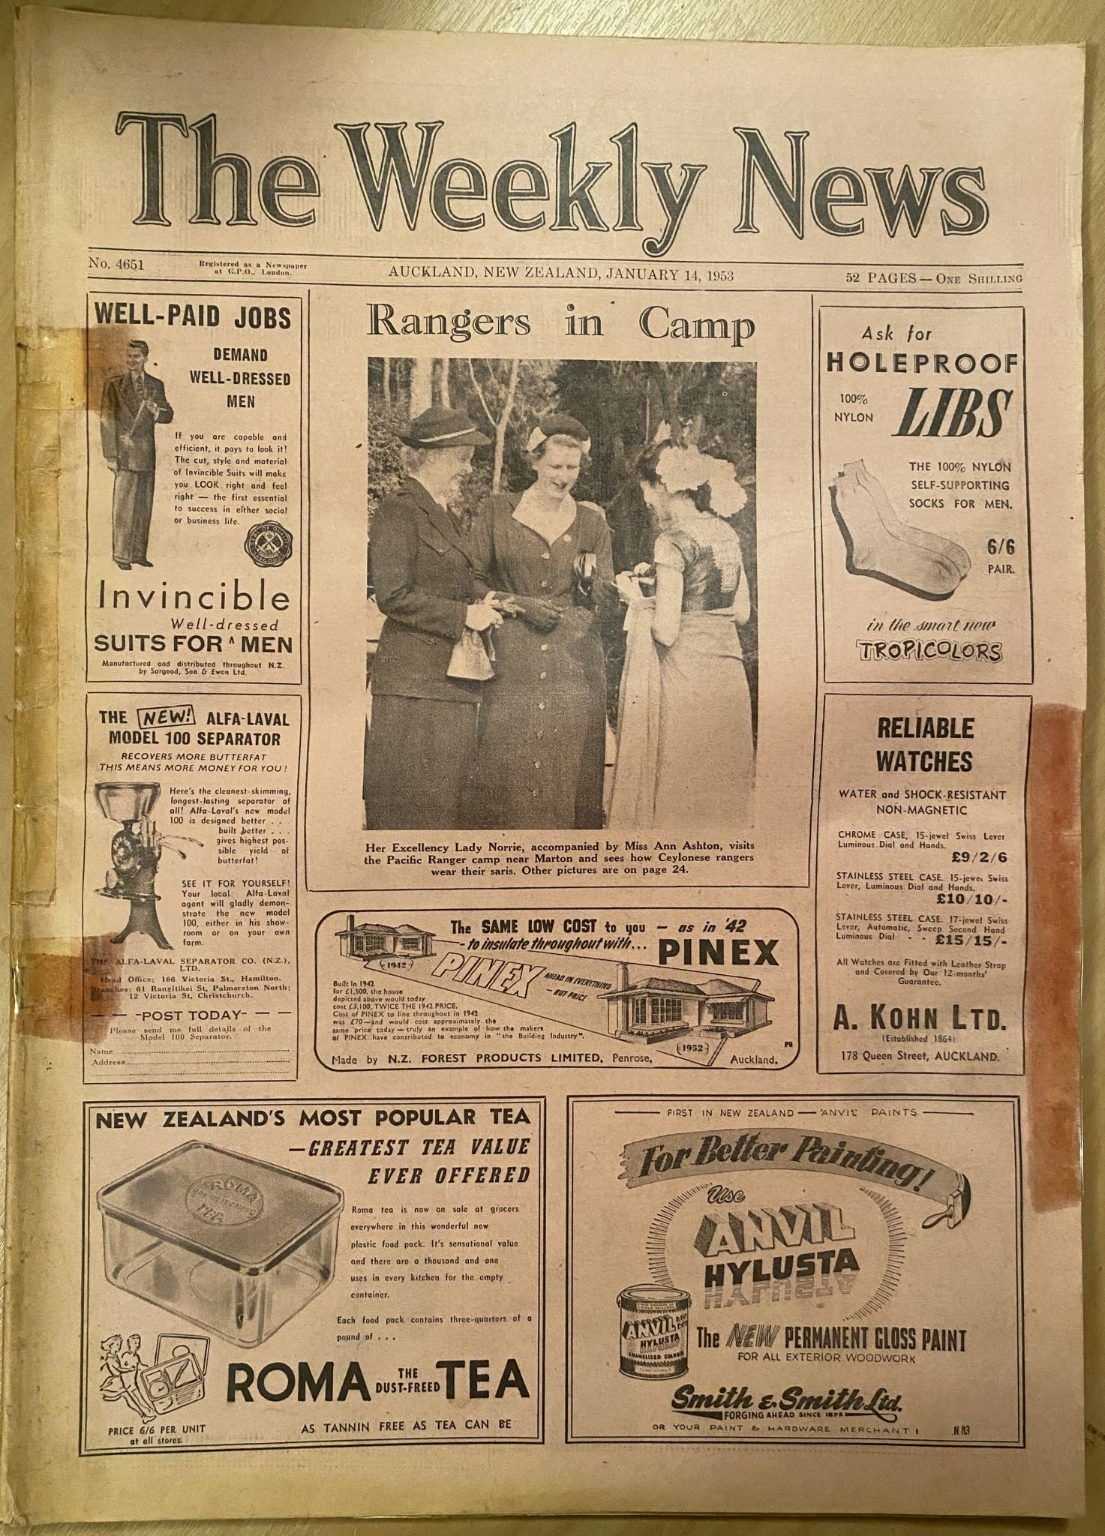 OLD NEWSPAPER: The Weekly News - No. 4651, 14 January 1953